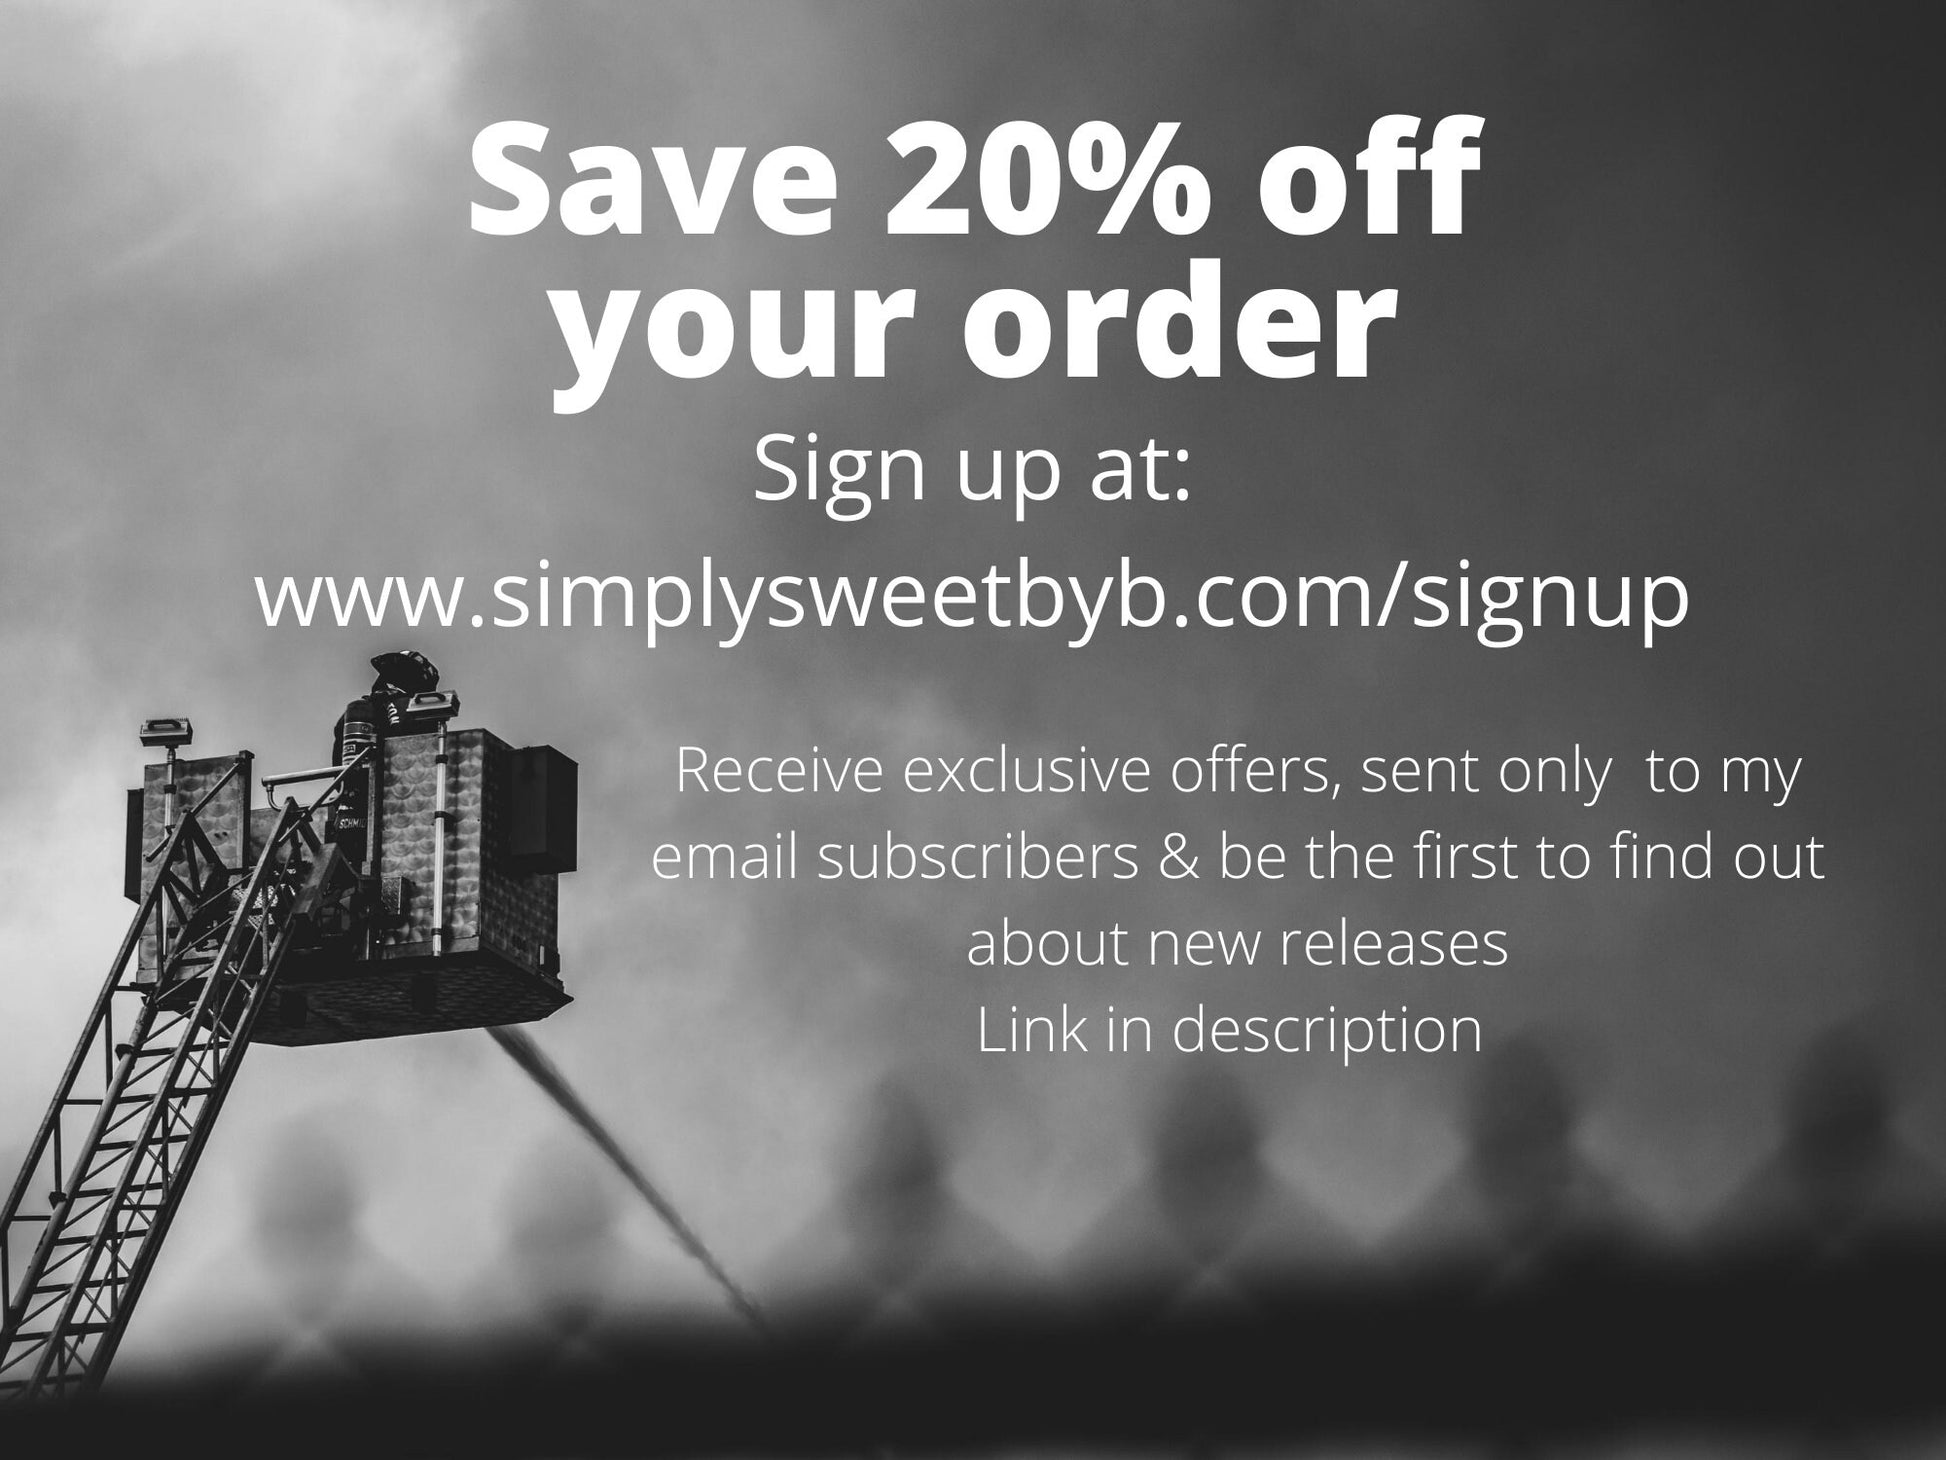 save 20% now sign up for email list